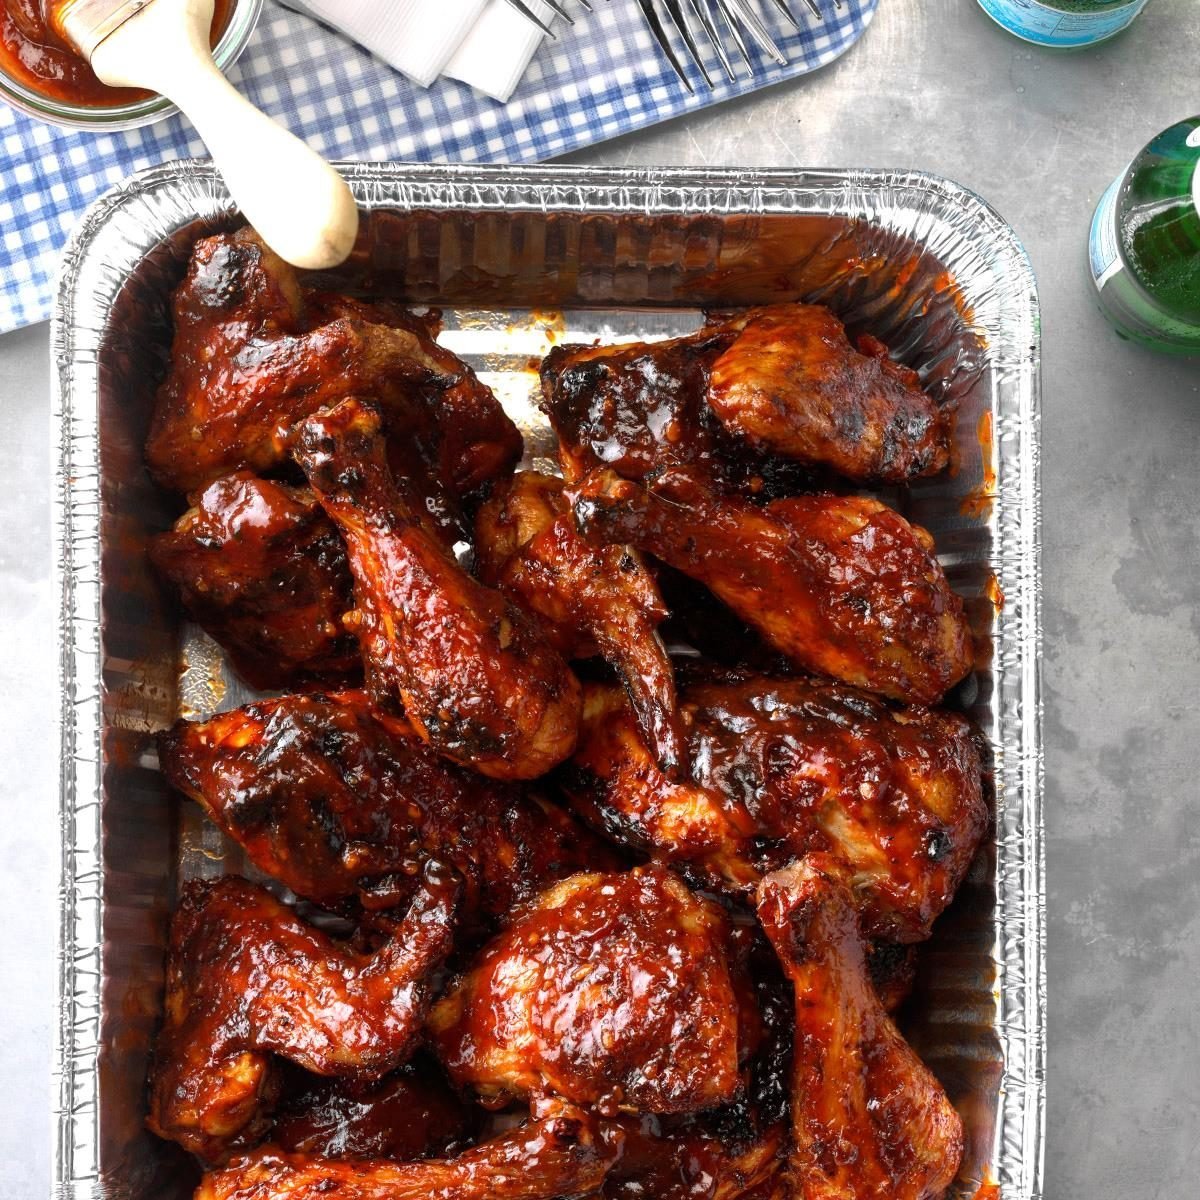 55 Barbecue Recipes That'll Make You Feel Like a Pitmaster